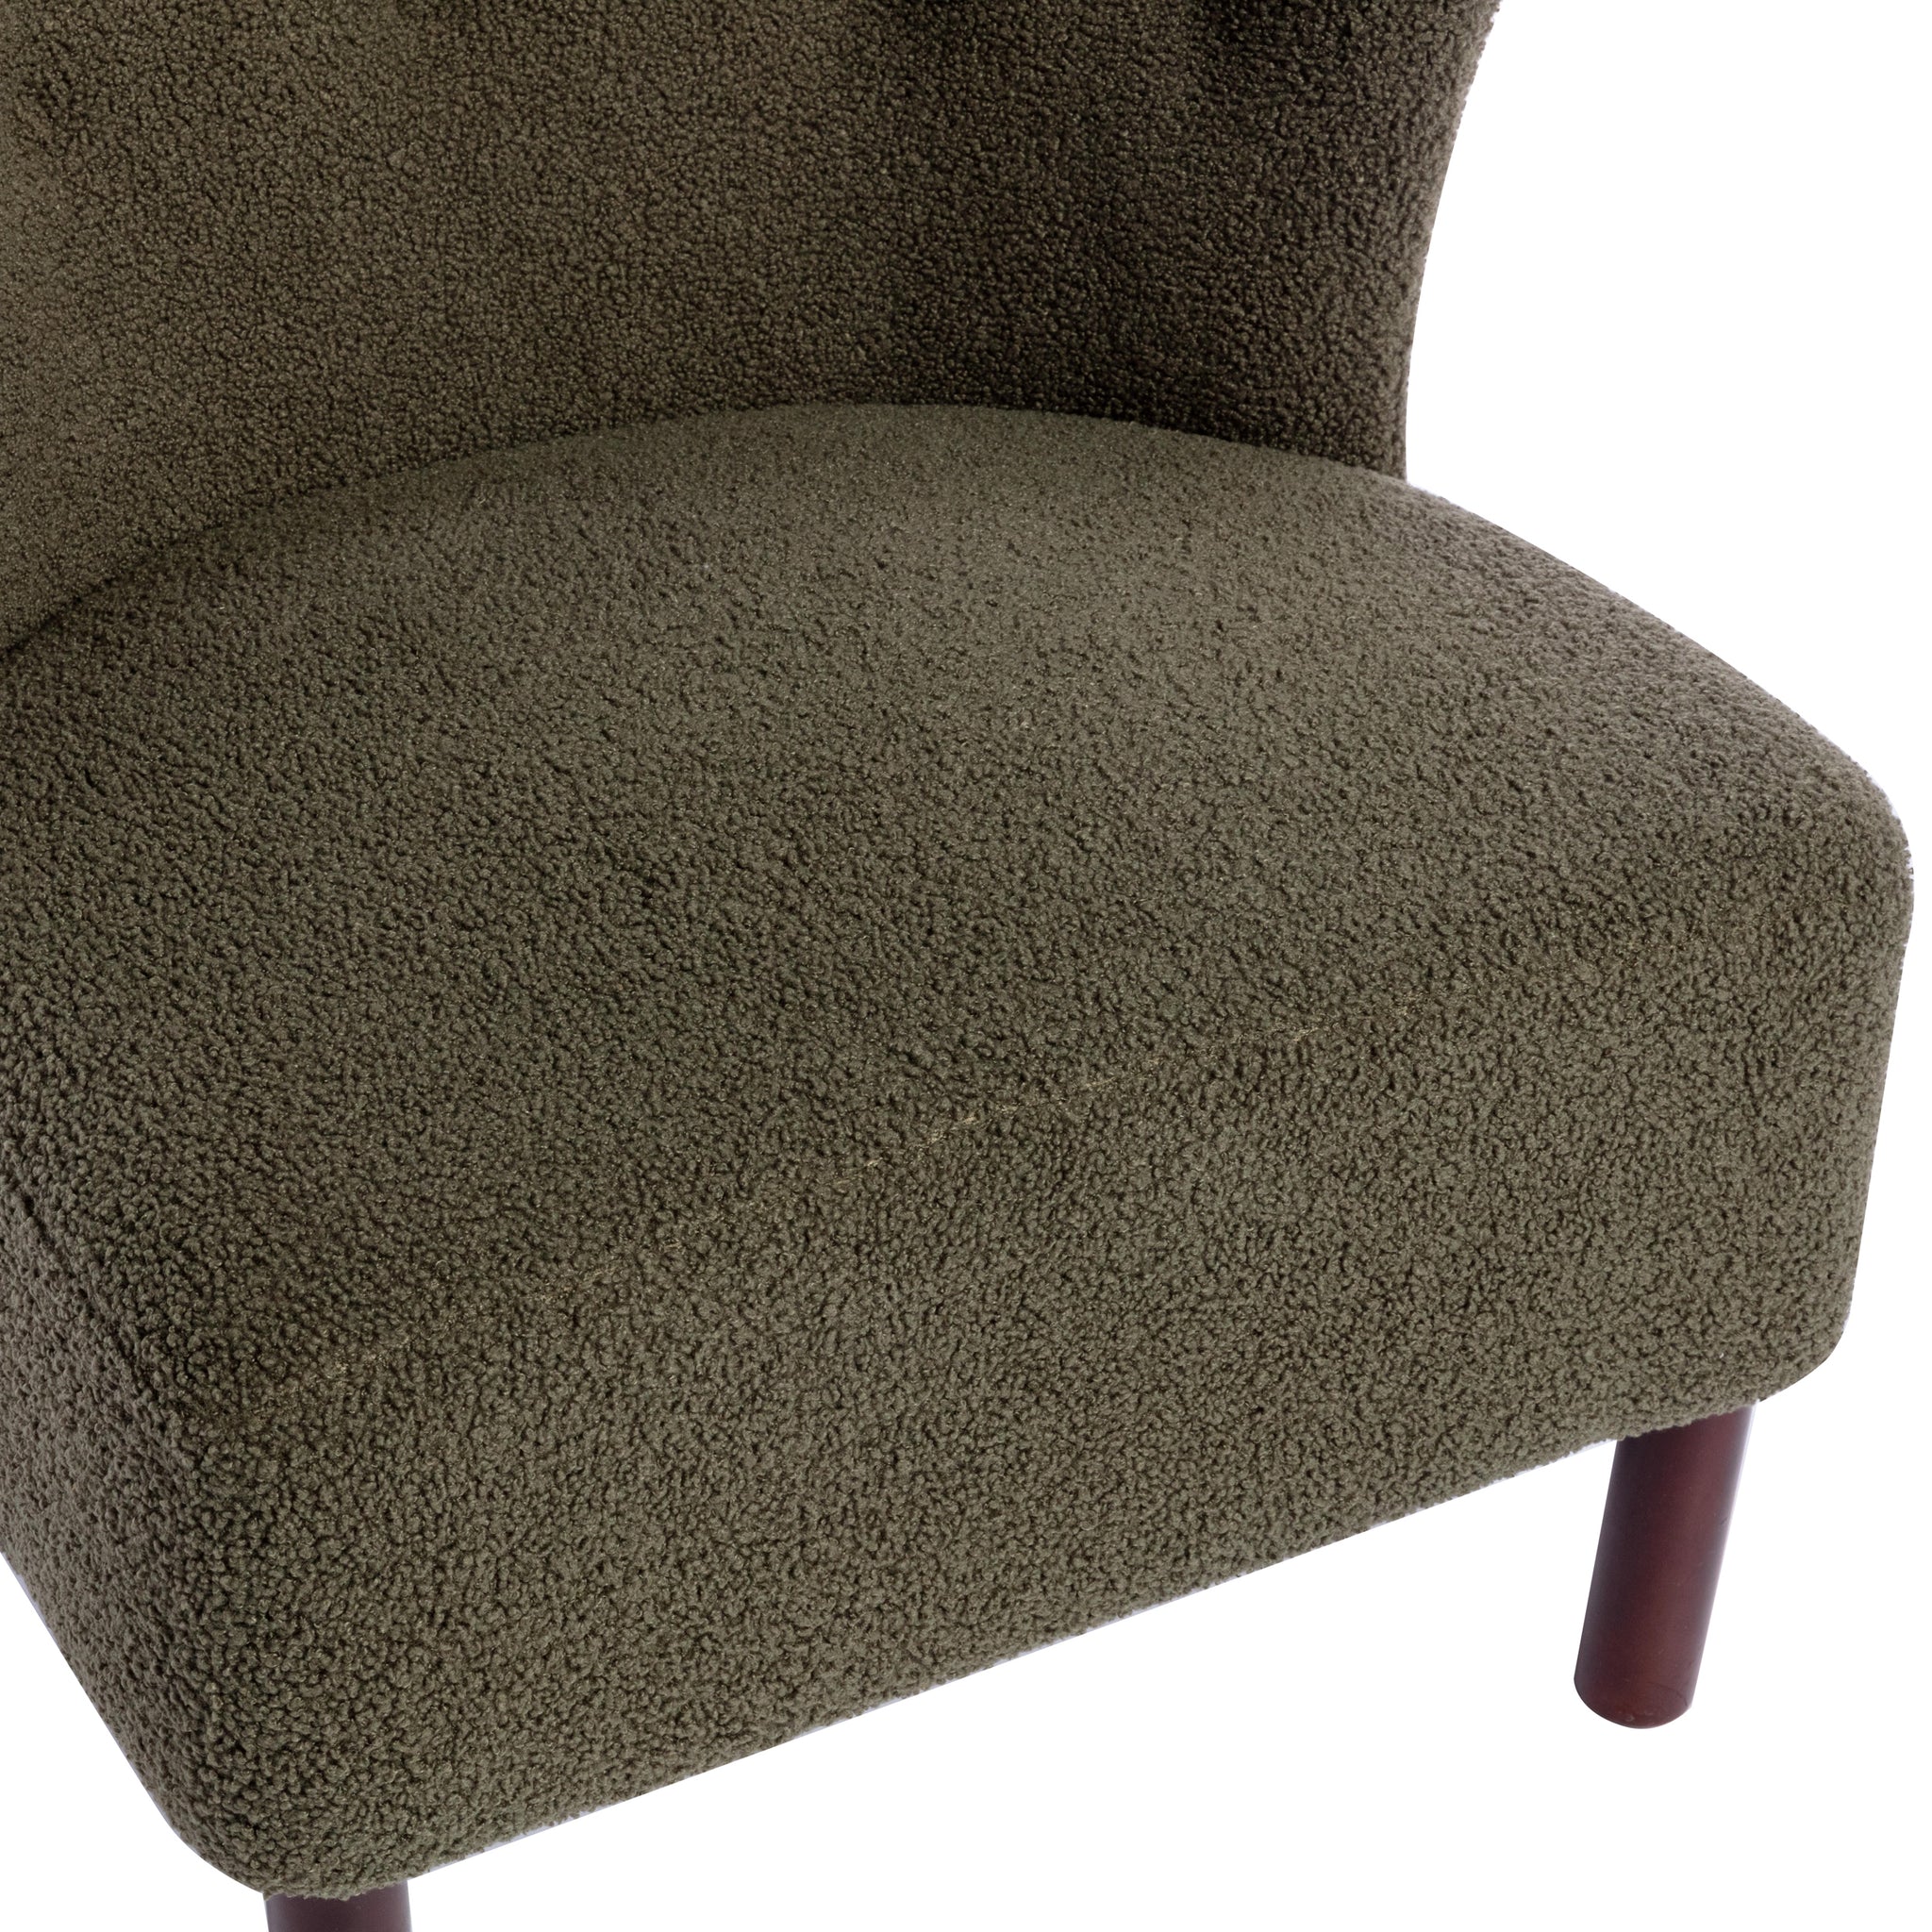 Accent Chair, Upholstered Armless Chair Lambskin green-polyester